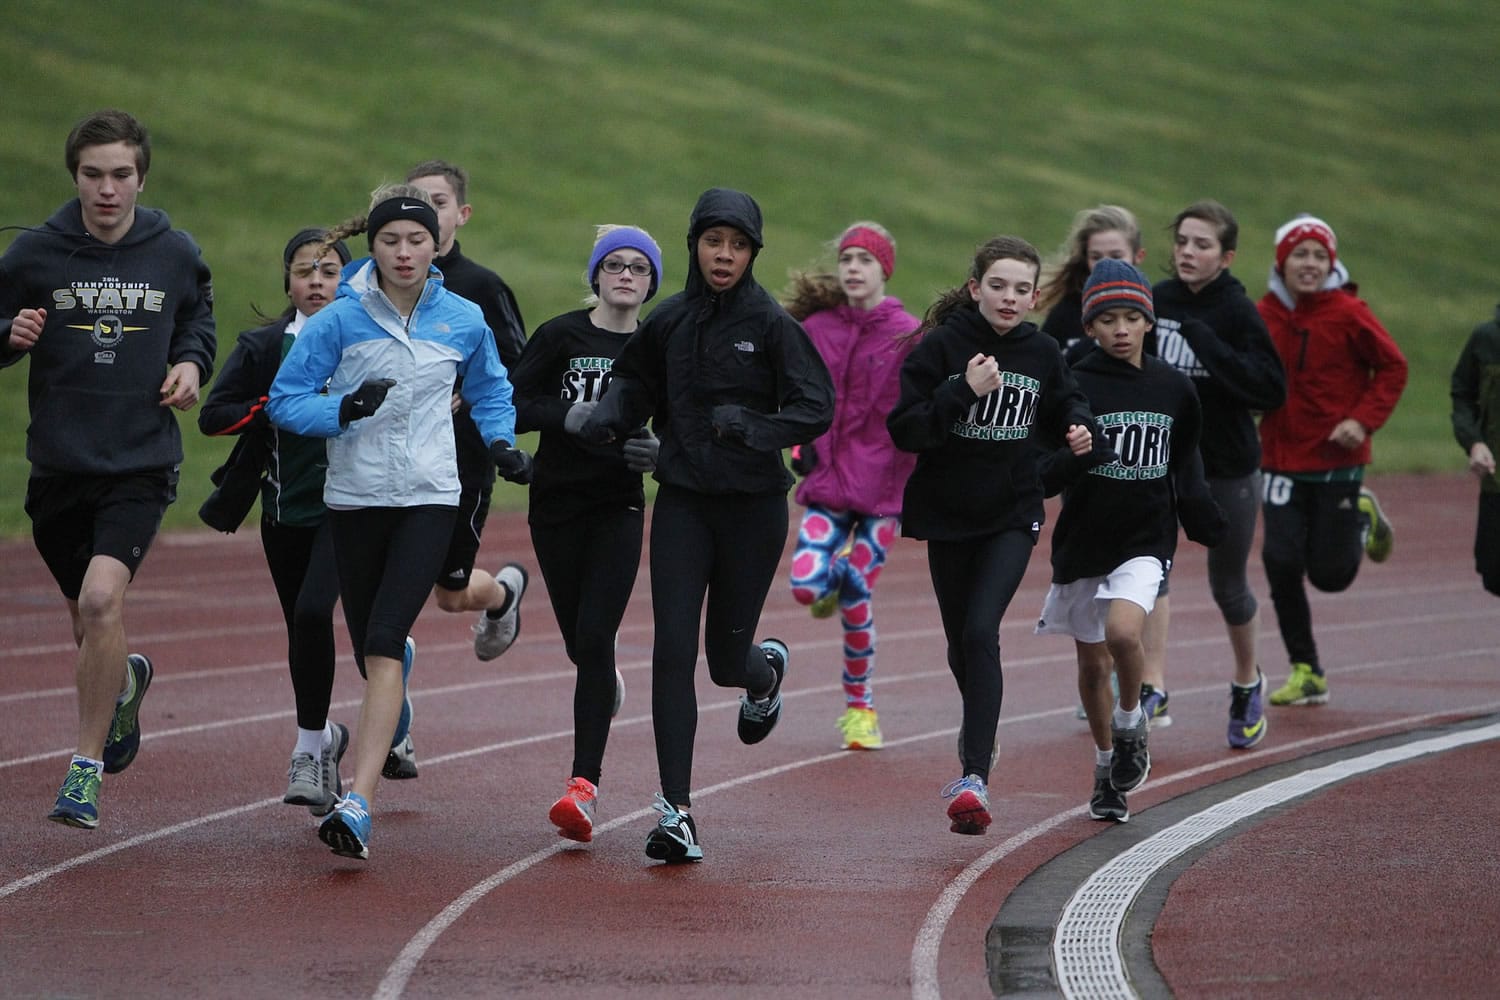 Evergreen Storm runners practice for the Junior Olympic national cross country championships in Myrtle Beach, SC.